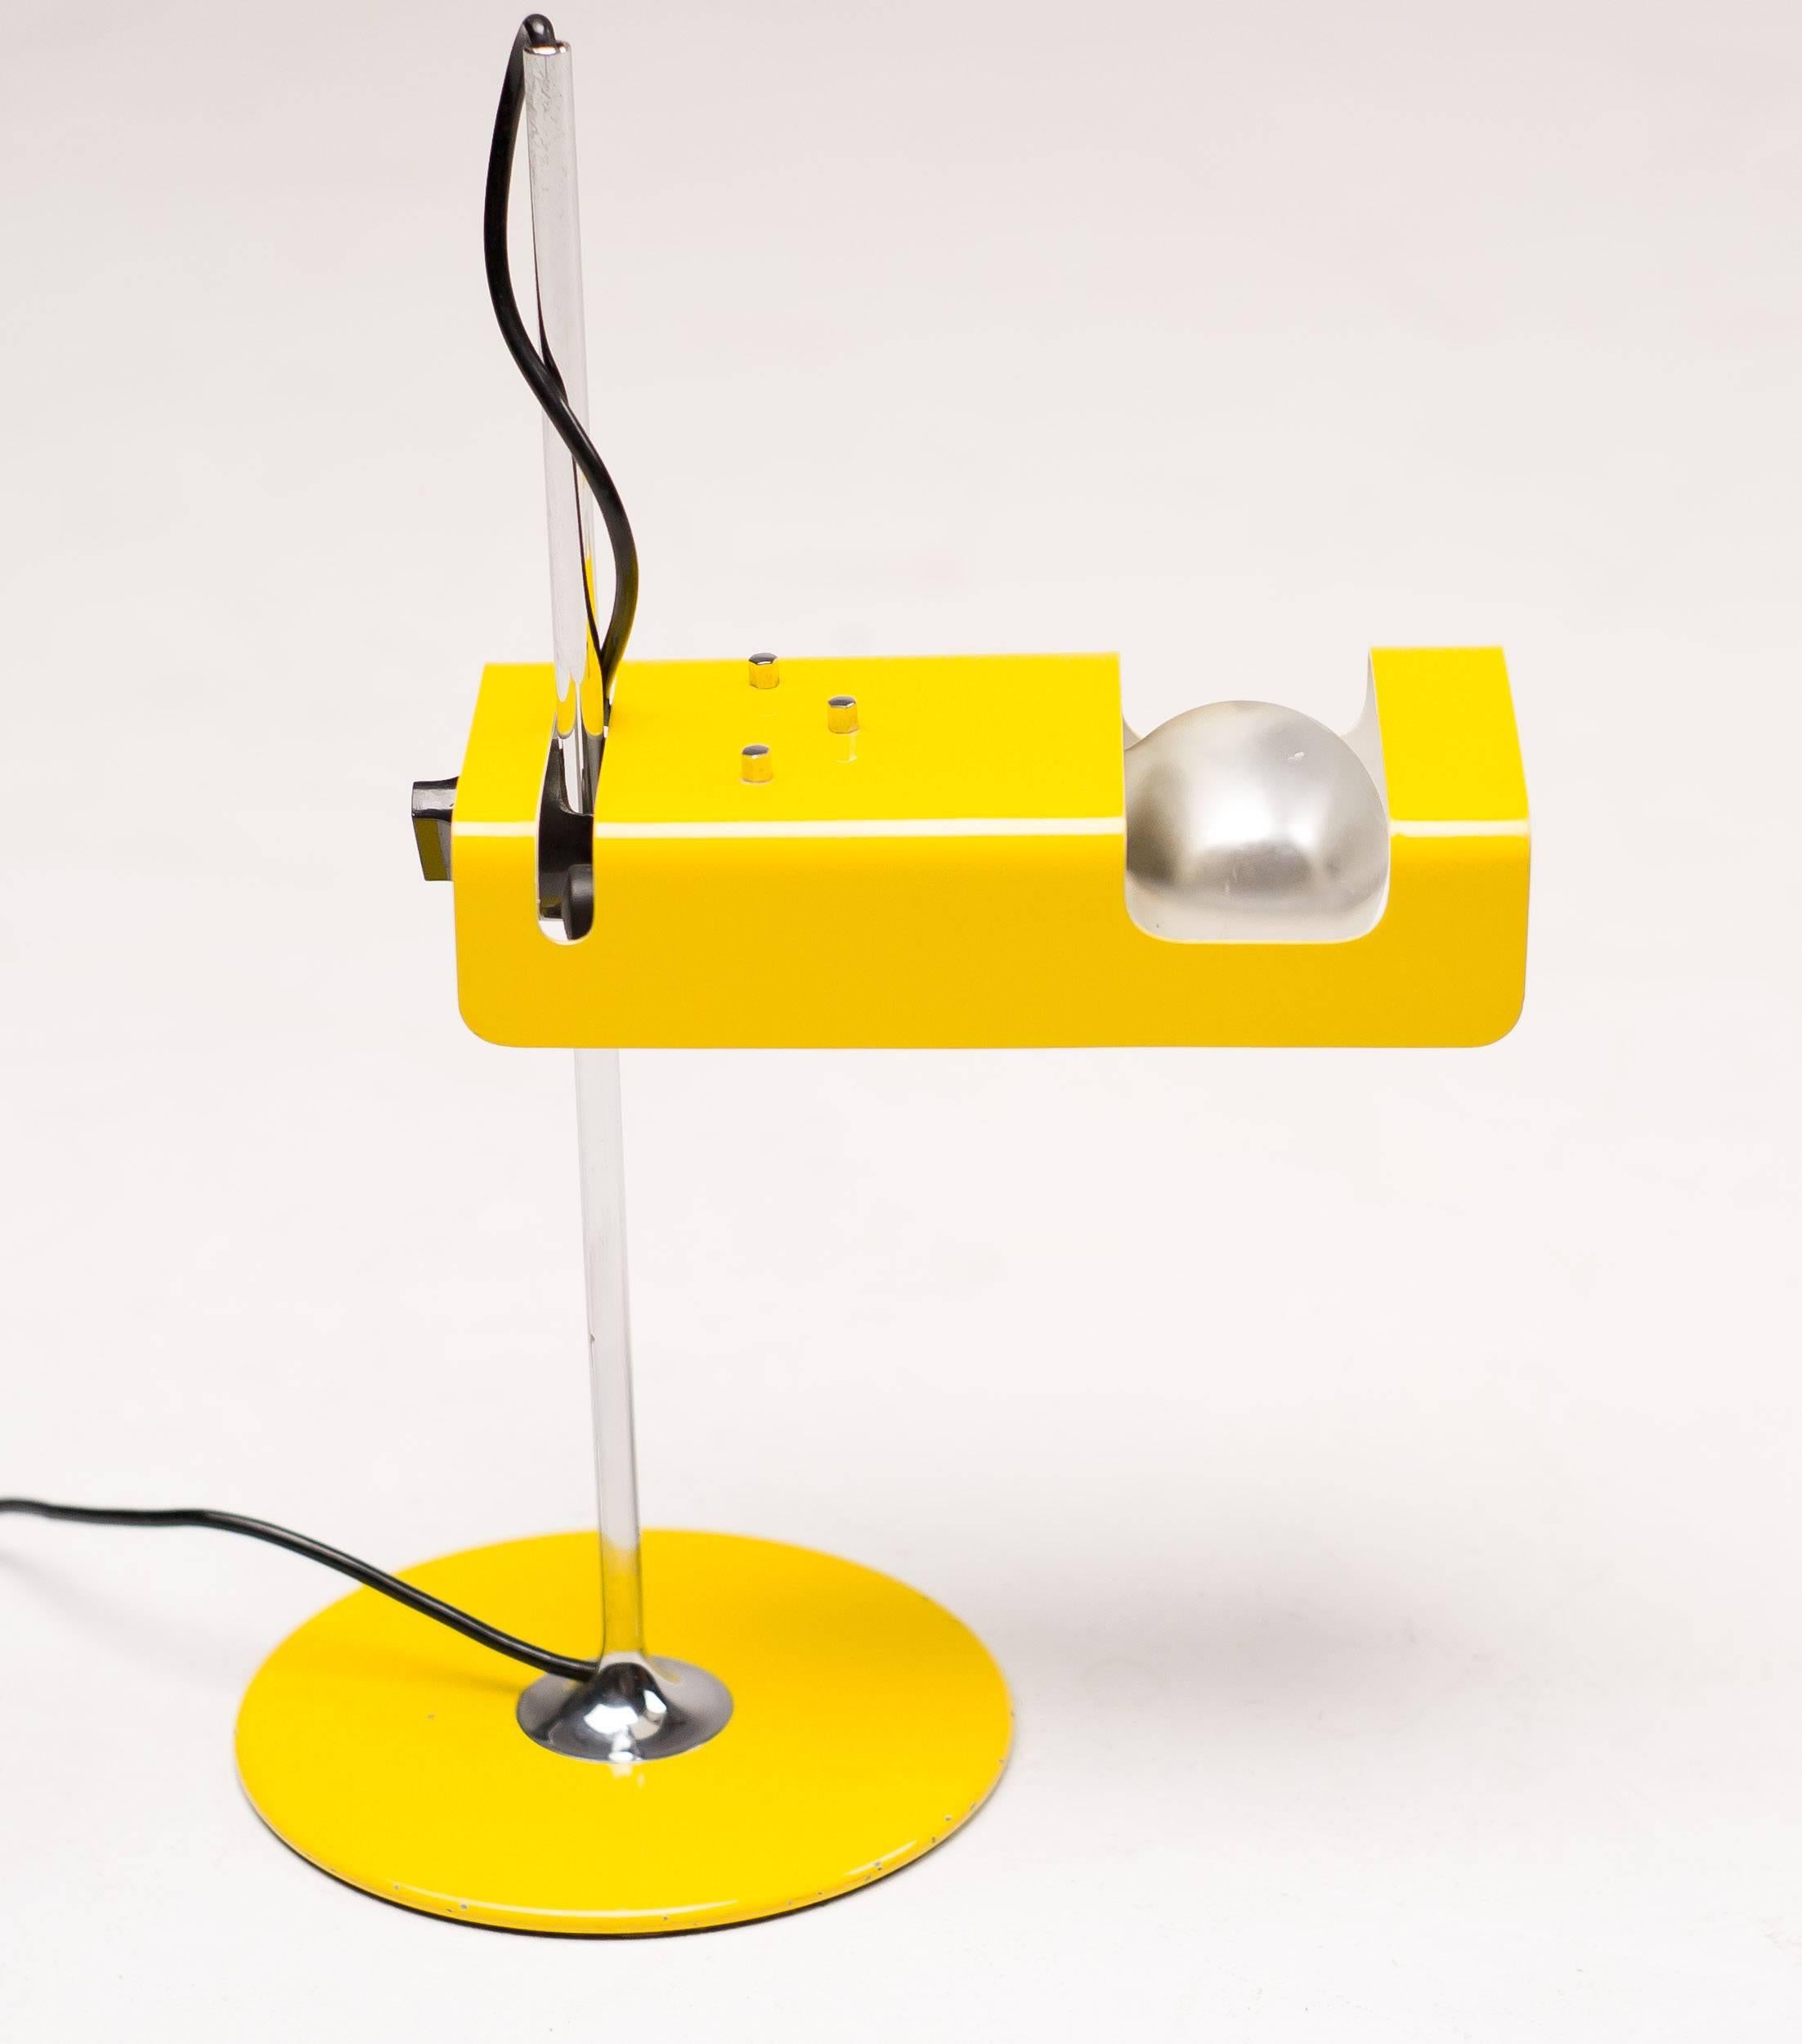 Joe Colombo 291 Spider adjustable desk lamp for O'Luce in very rare yellow and chrome. This design won the 